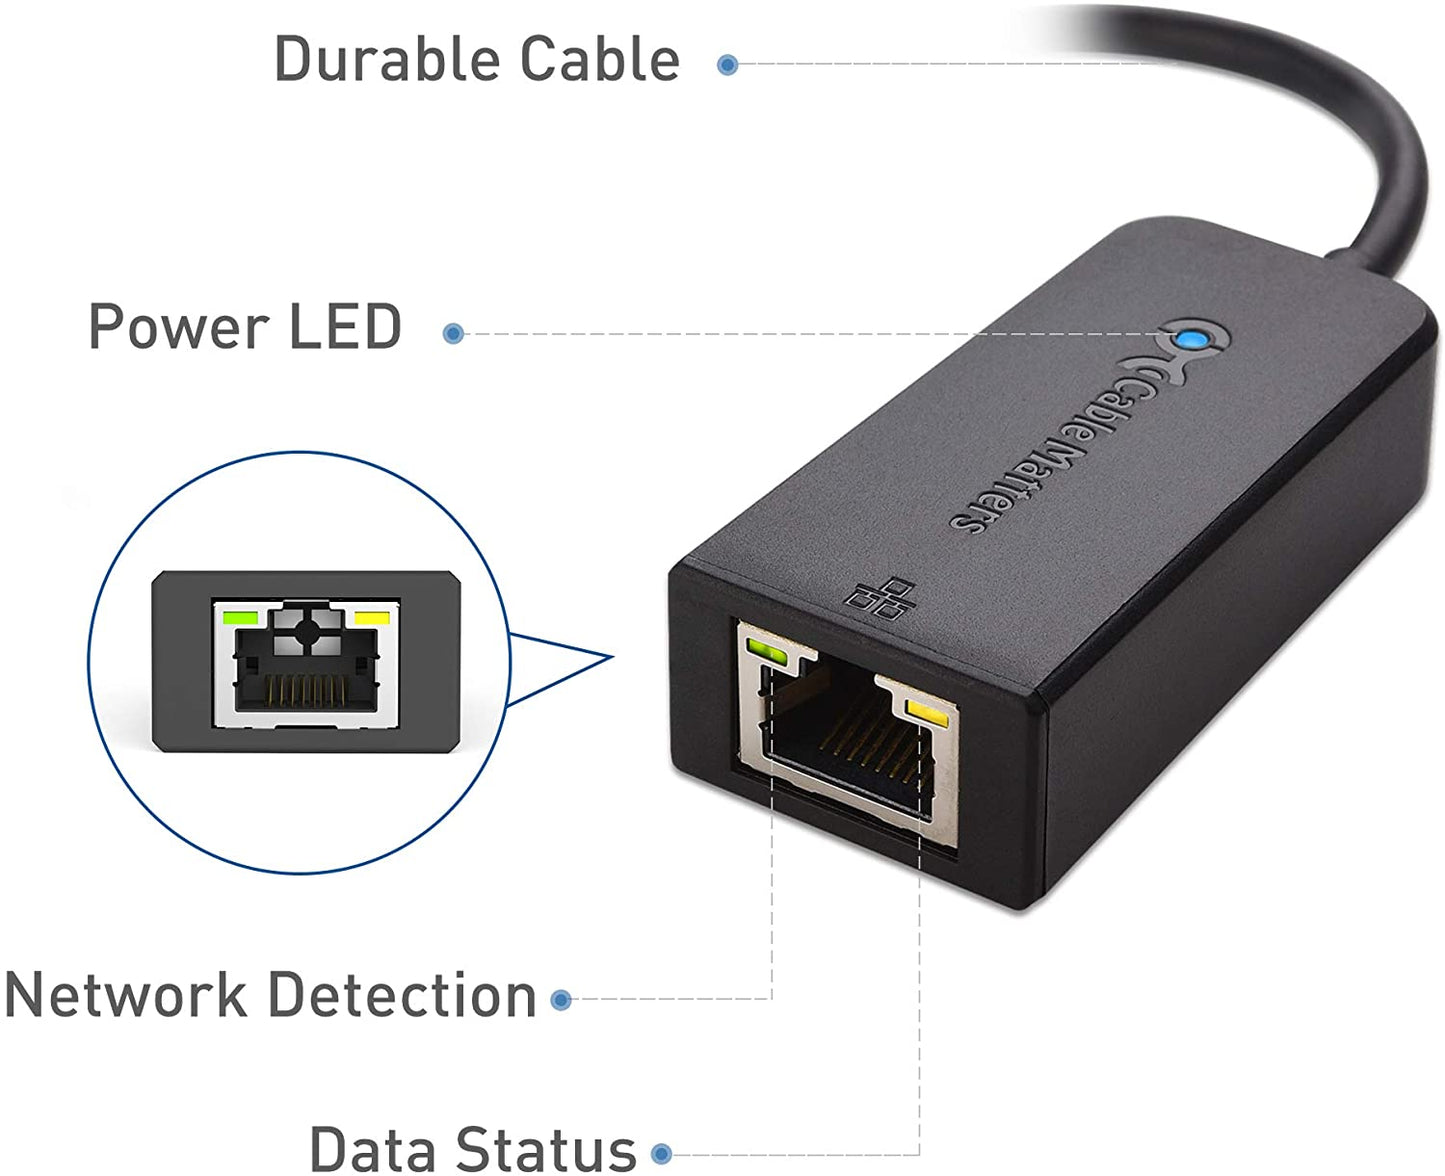 CABLE, ETHERNET TO USB ADAPTER Information Technology DEX 